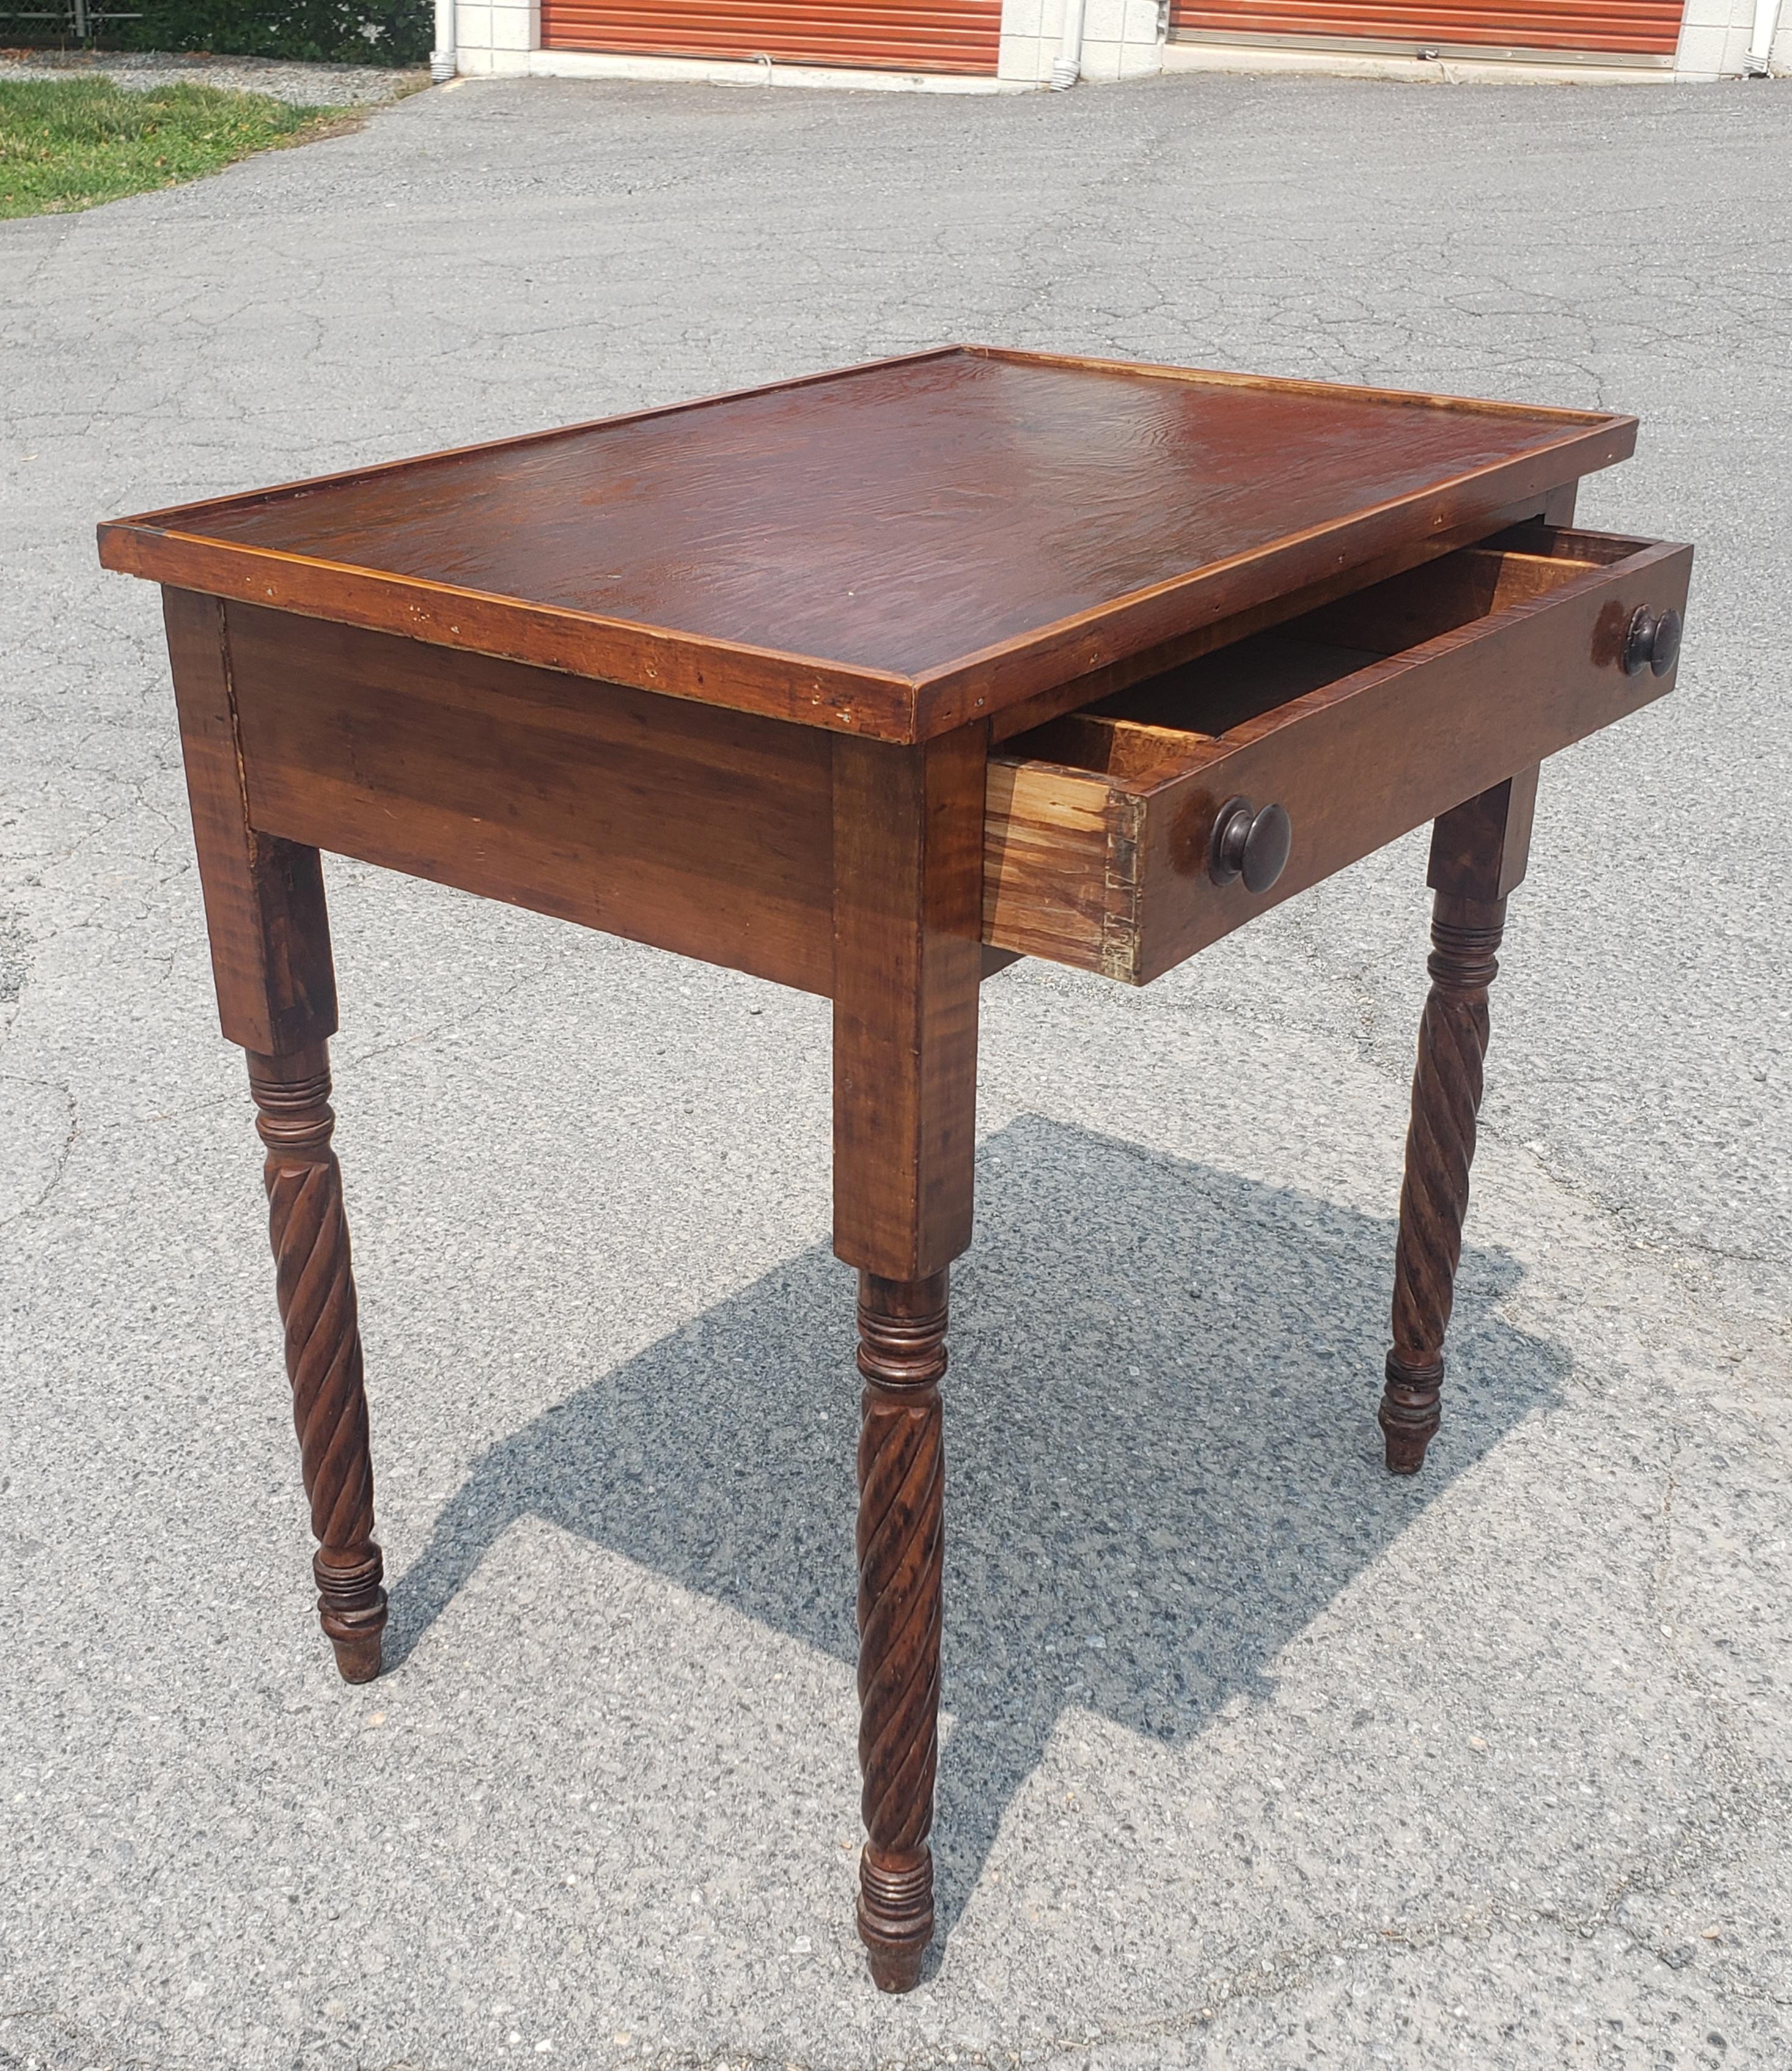 Early American Style Pine and Maple Spiral-Turned Leg Single Drawer Work Table In Good Condition For Sale In Germantown, MD